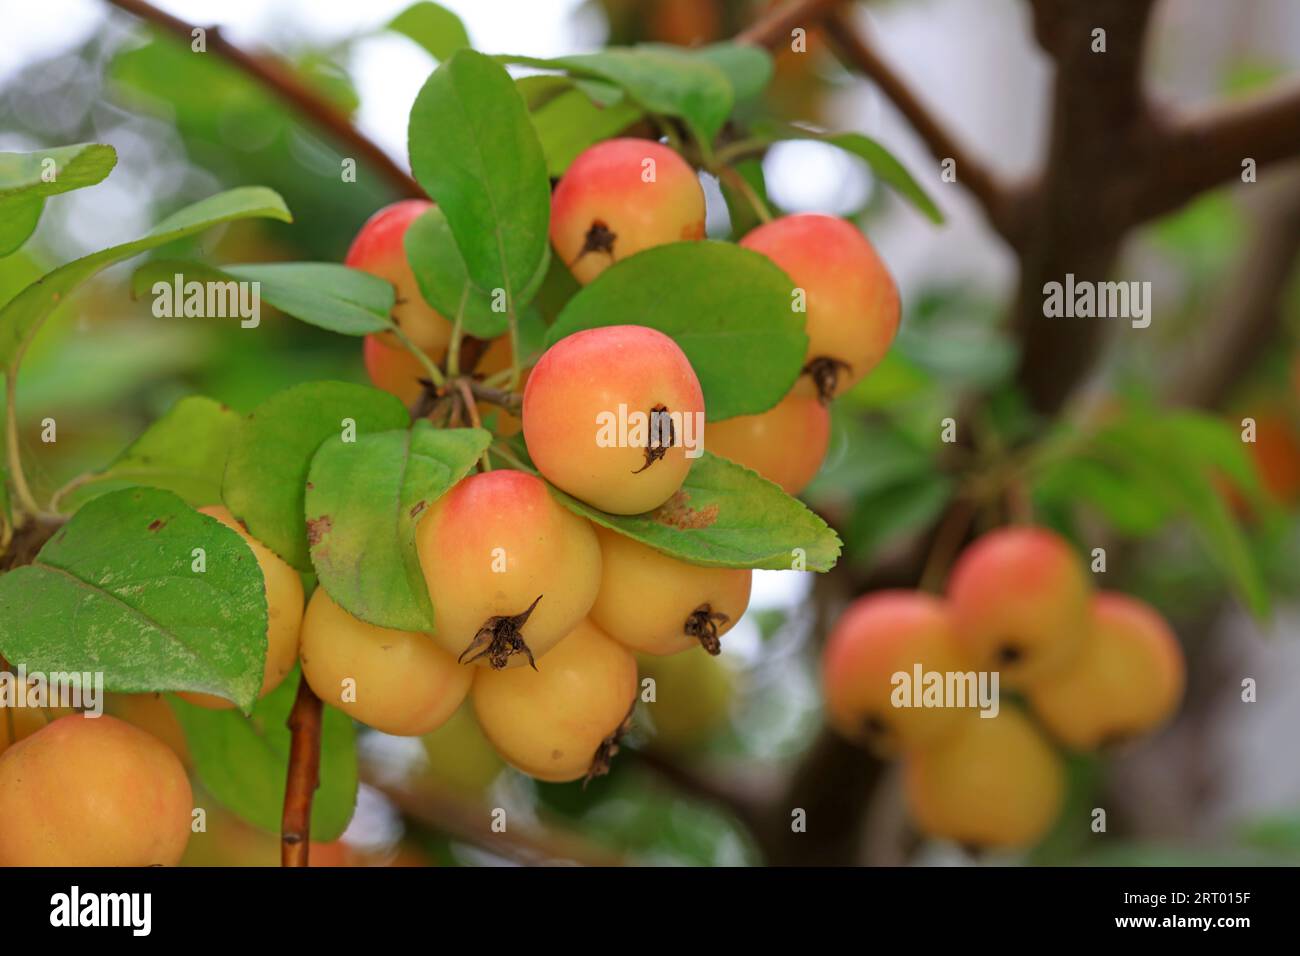 Ripe Begonia fruit on the branch, North China Stock Photo